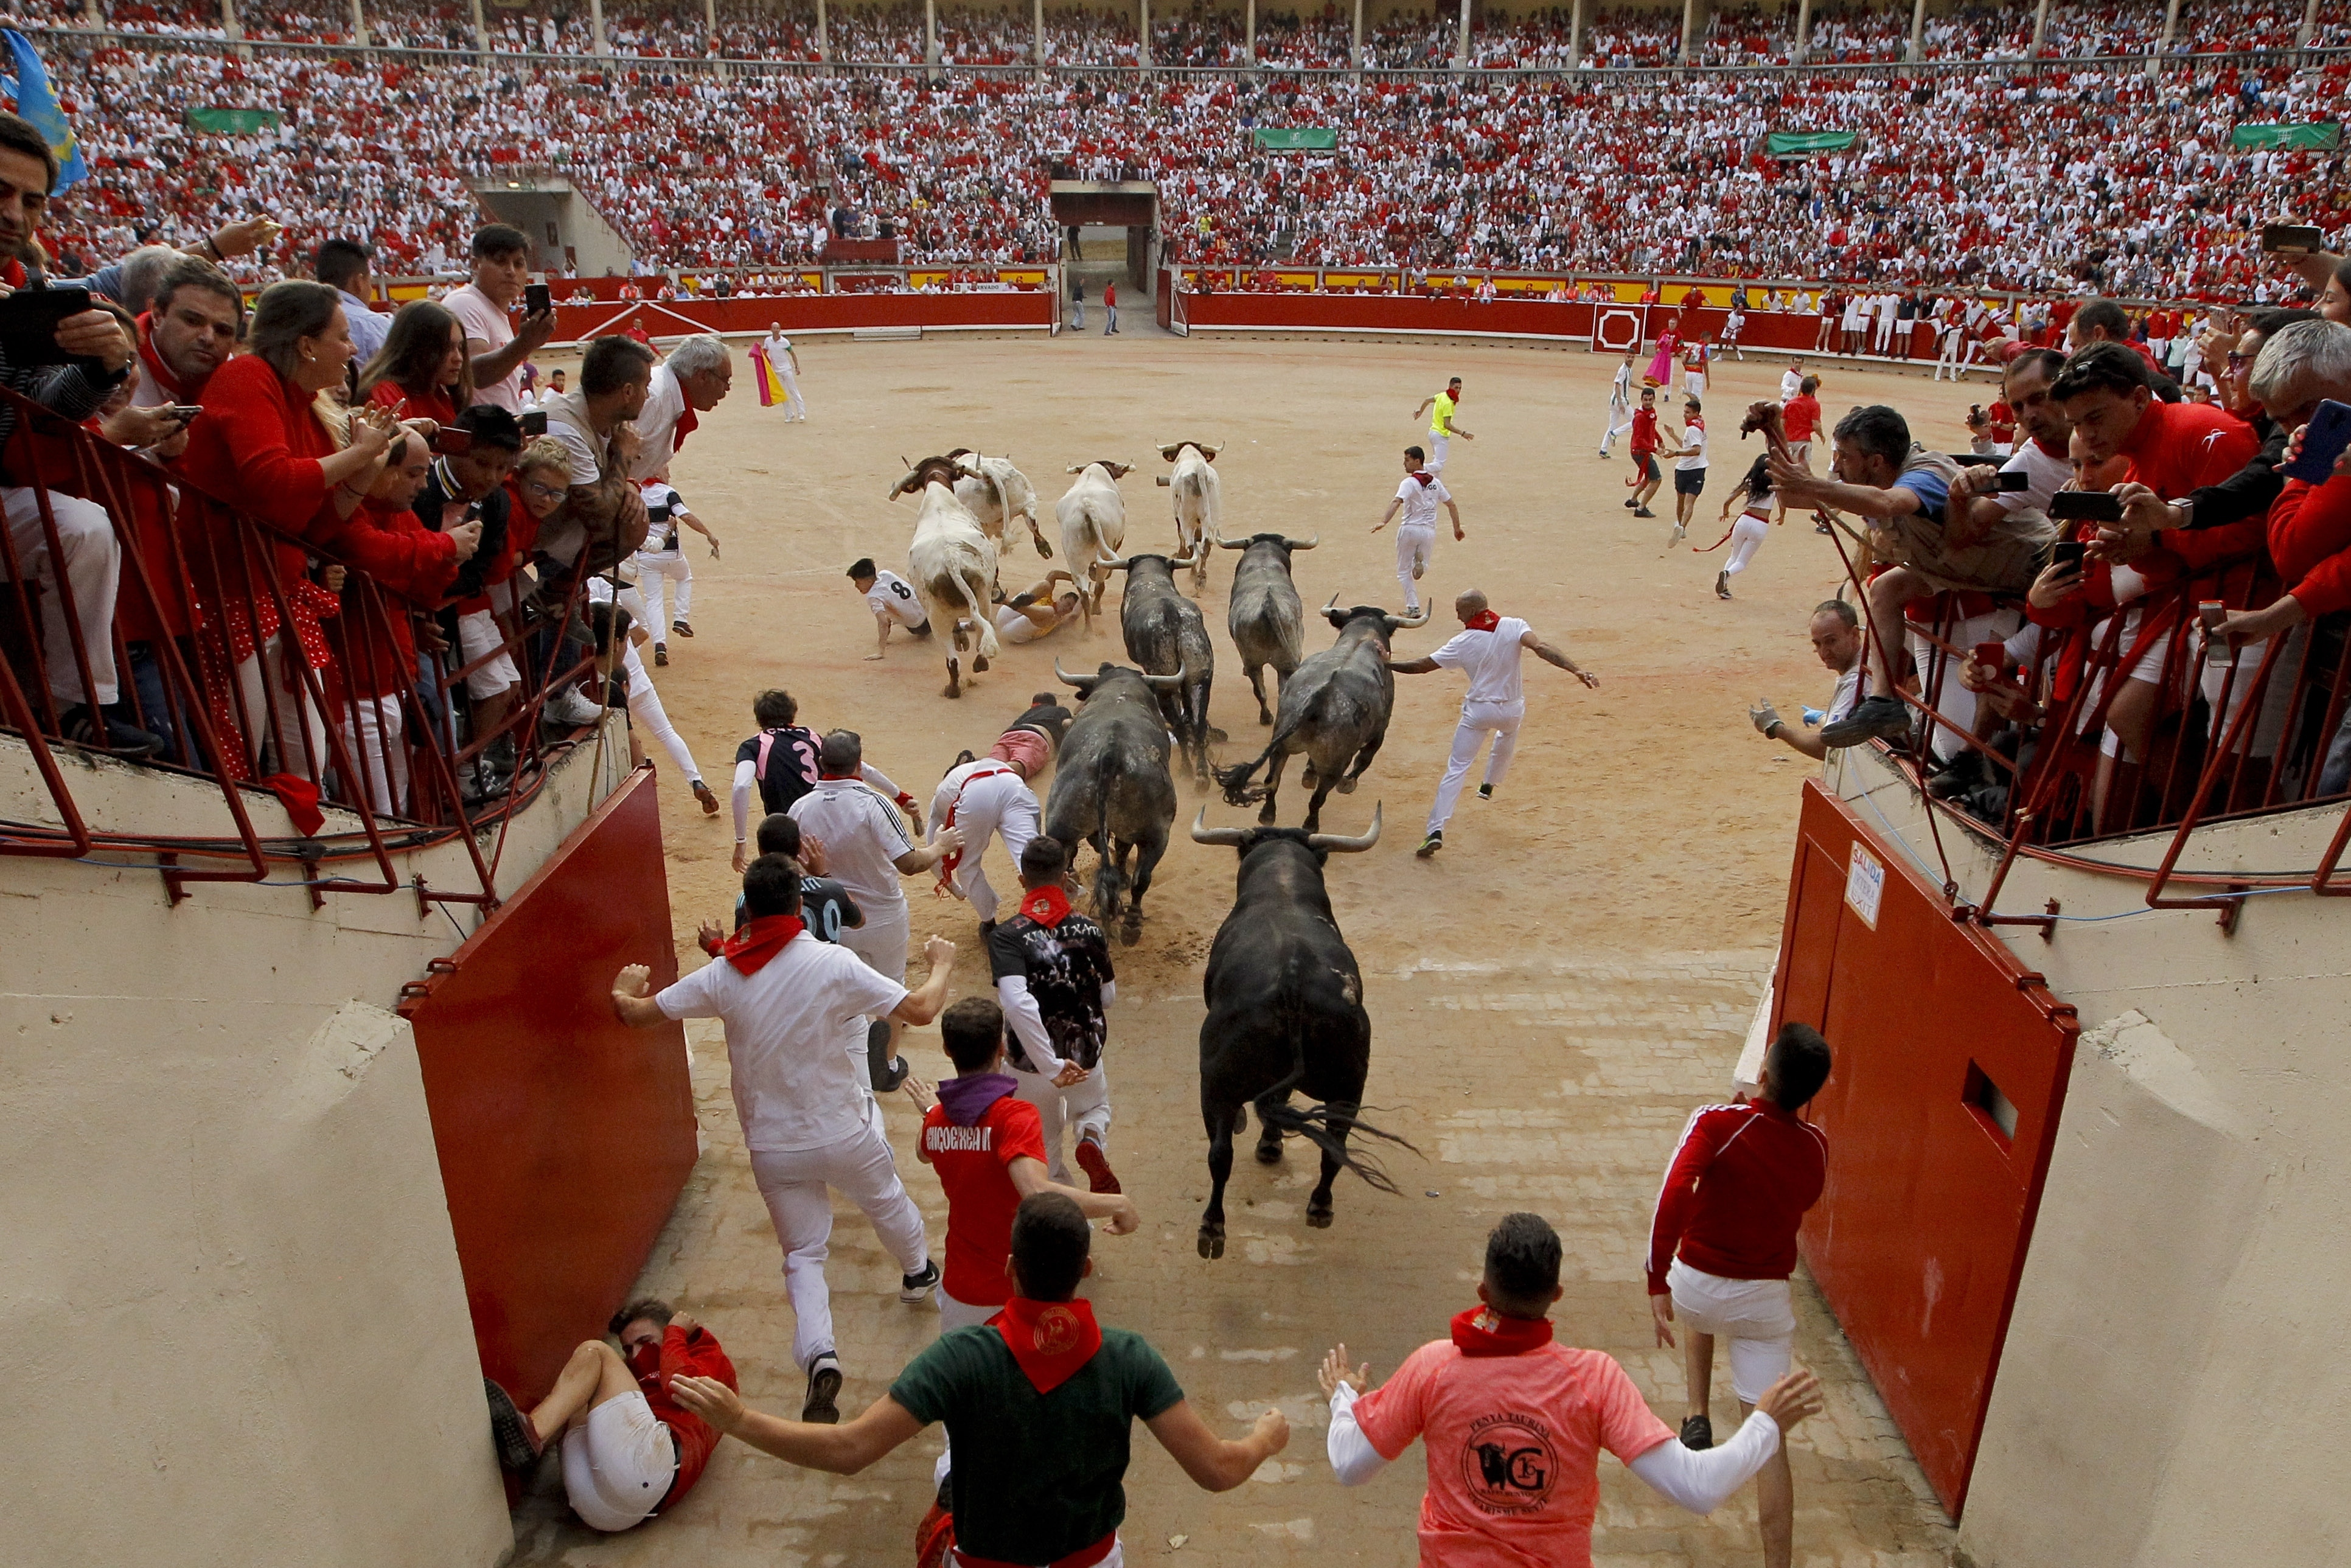 Revellers and fighting bulls arrive at the bullring during the running of the bulls at the San Fermin Festival, in Pamplona, northern Spain, Sunday, July 14, 2019. The San Fermin fiesta made internationally famous by Ernest Hemingway in his novel 